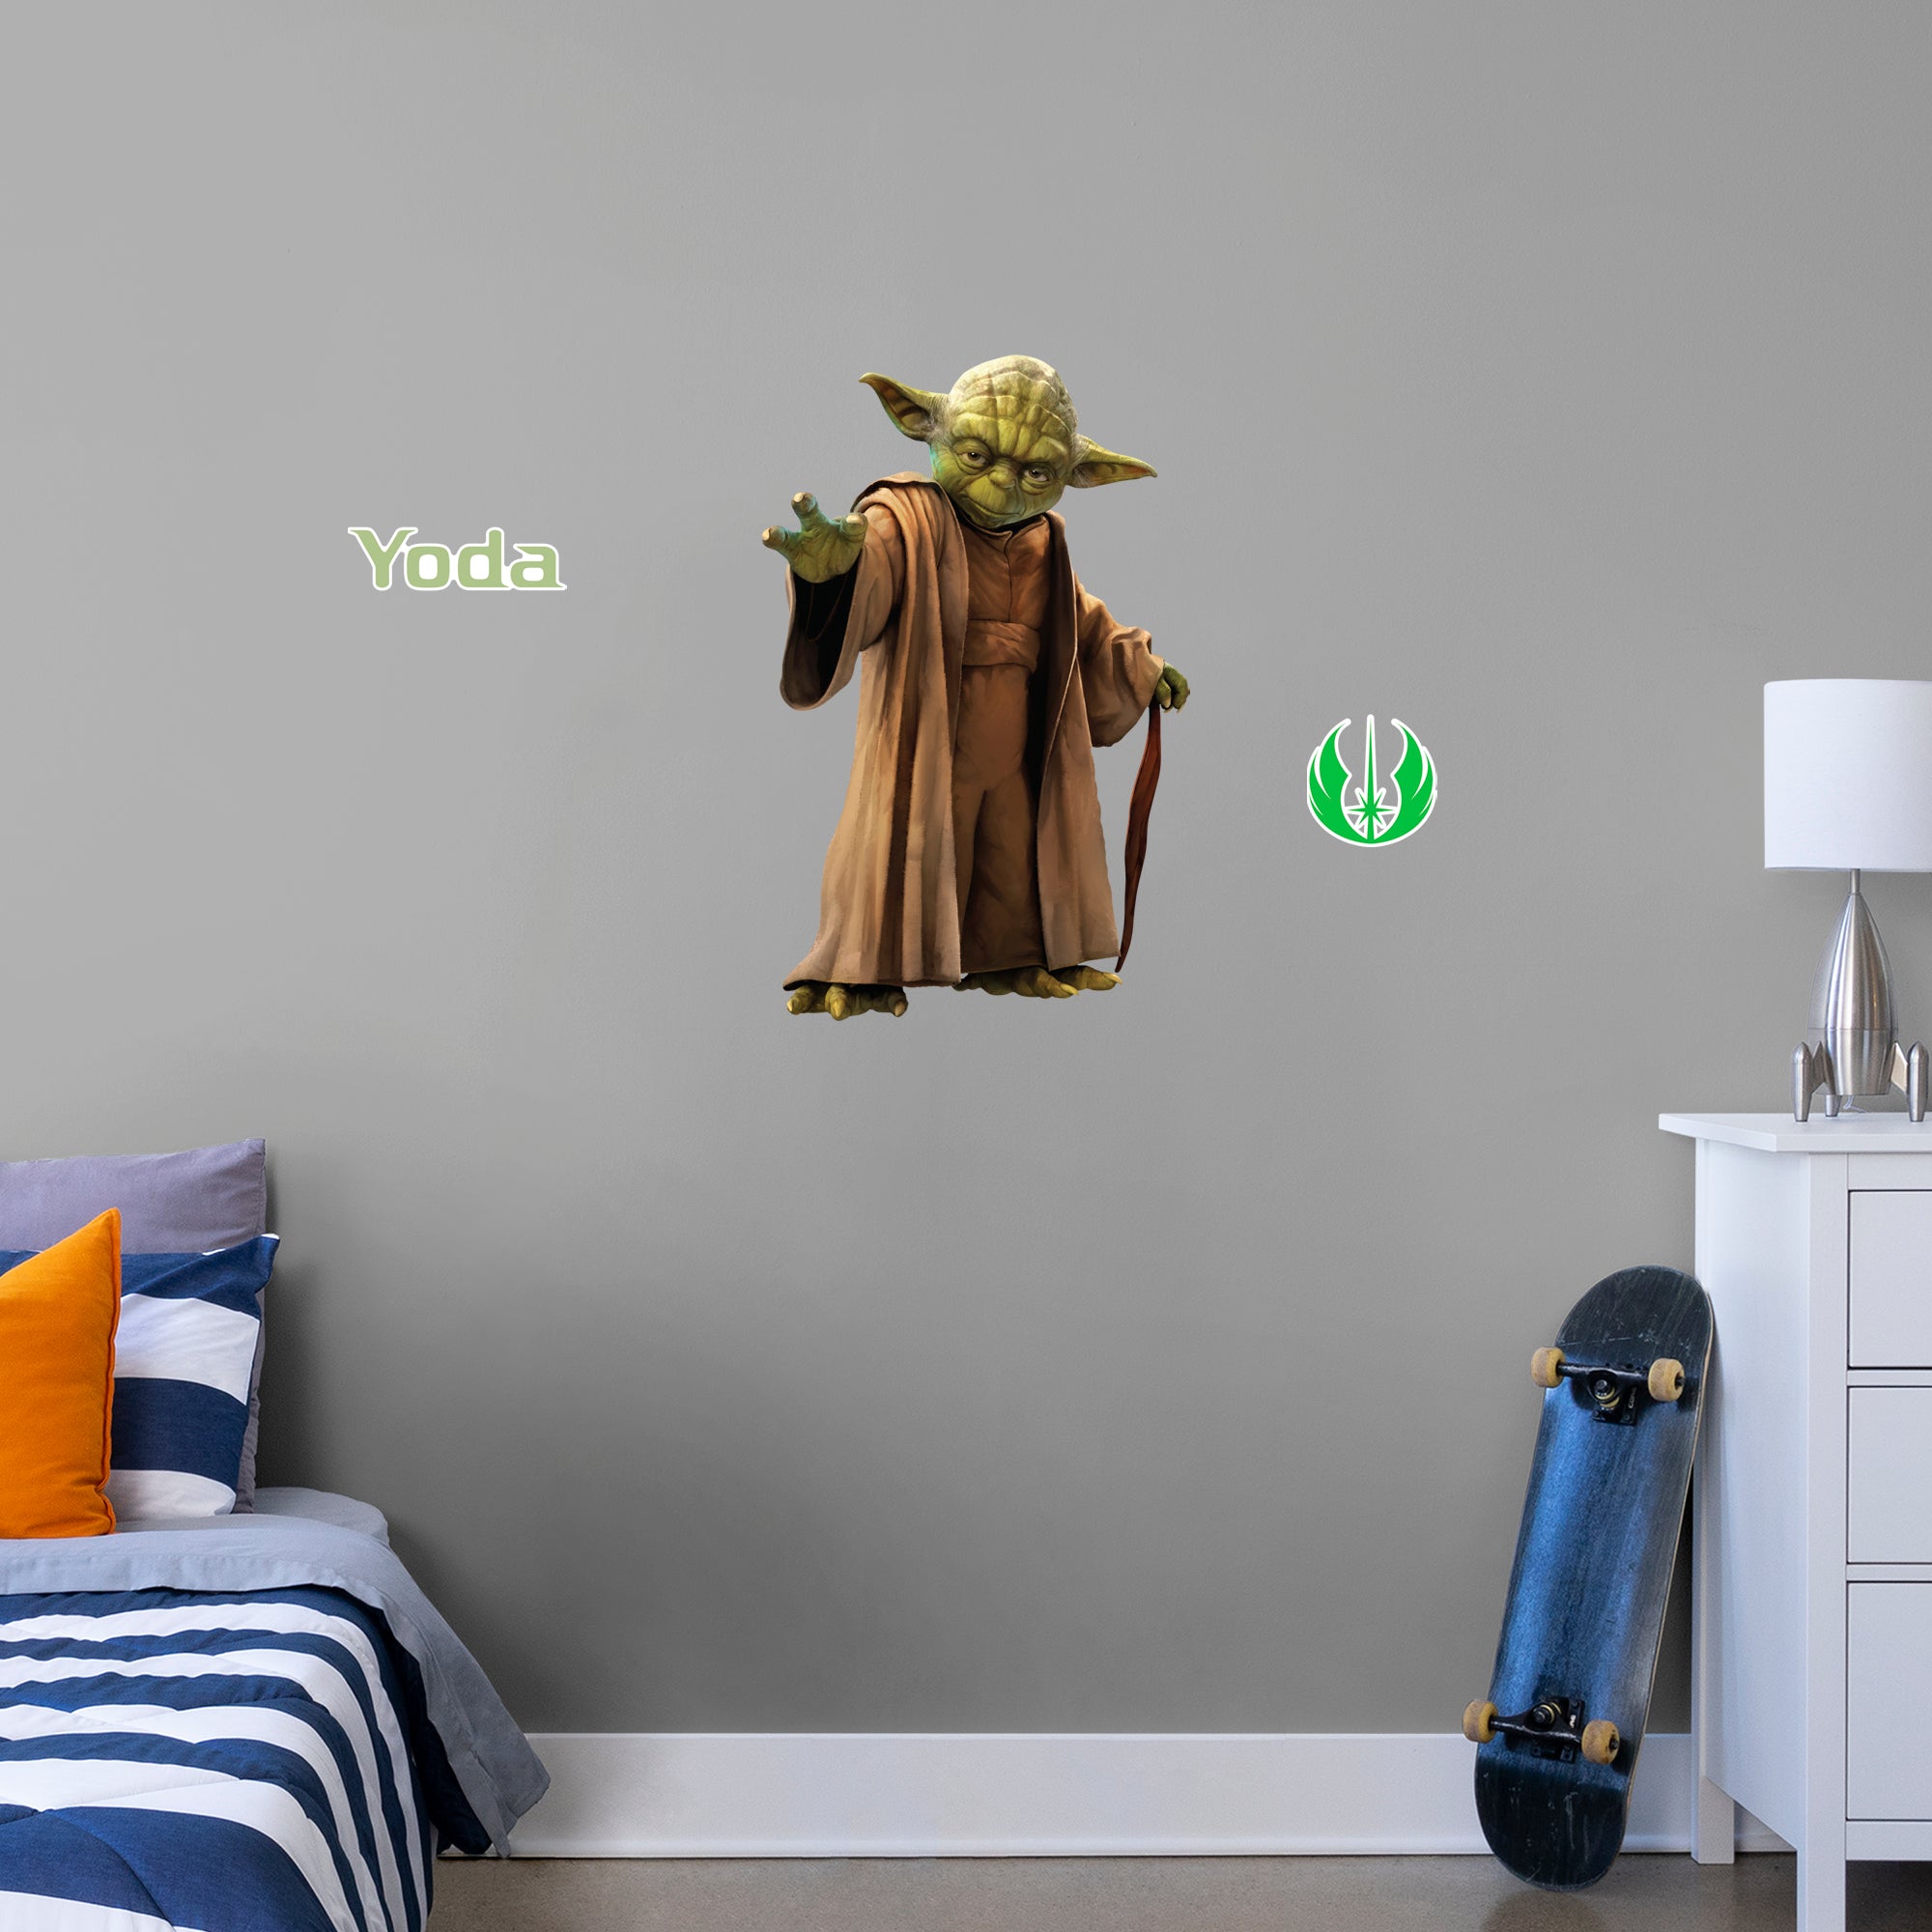 Yoda 2020 - Officially Licensed Star Wars Removable Wall Decal XL by Fathead | Vinyl